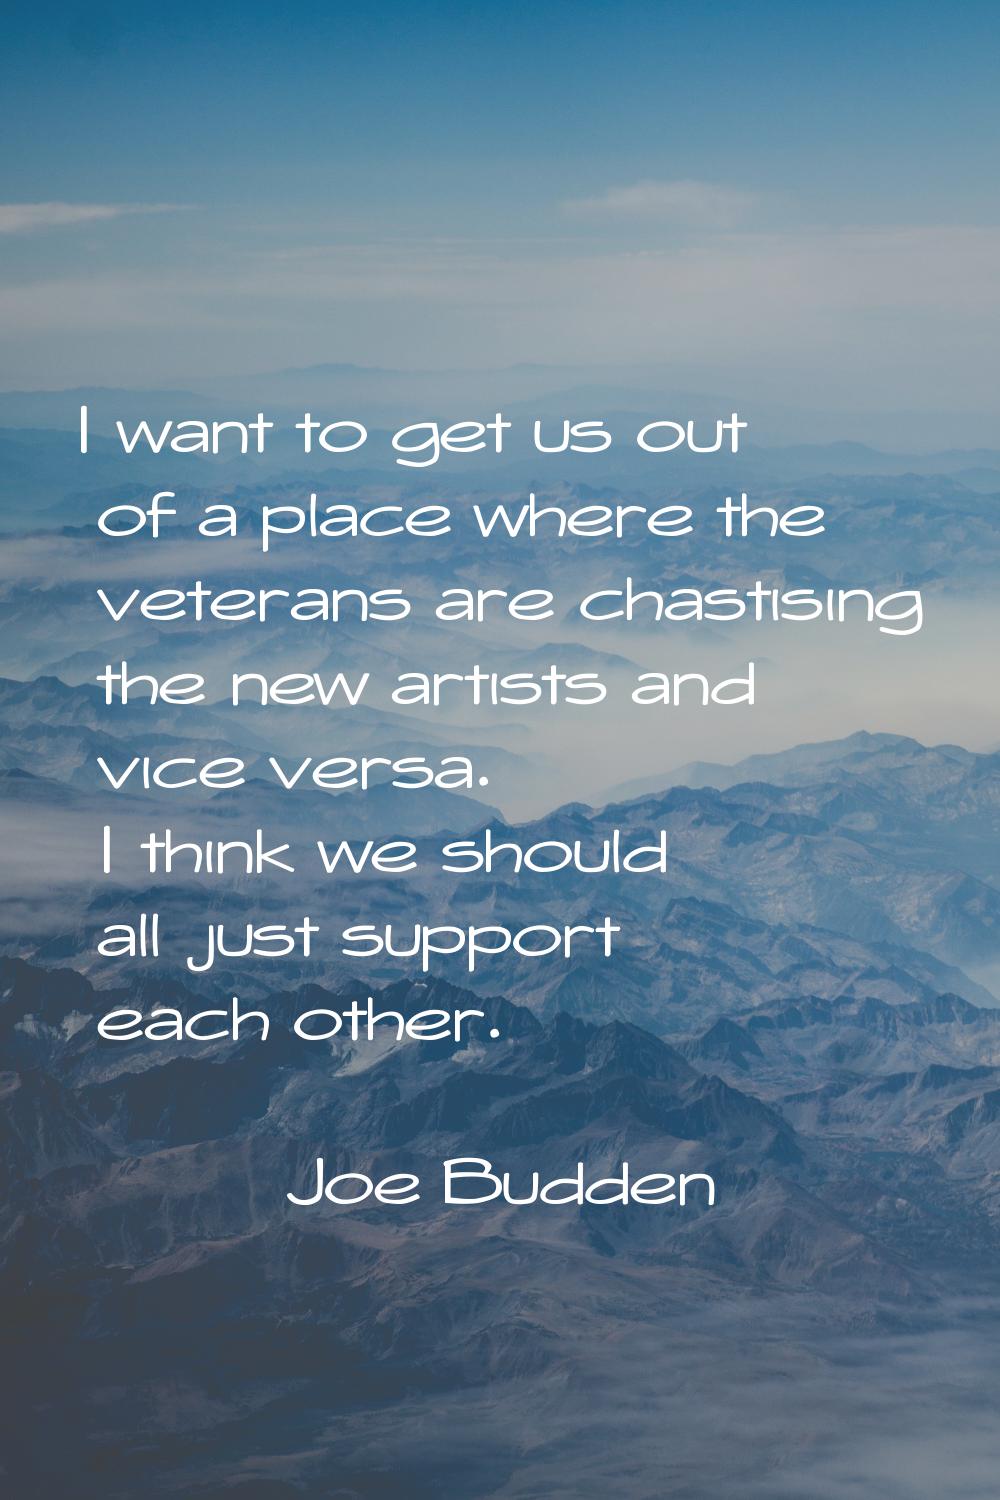 I want to get us out of a place where the veterans are chastising the new artists and vice versa. I